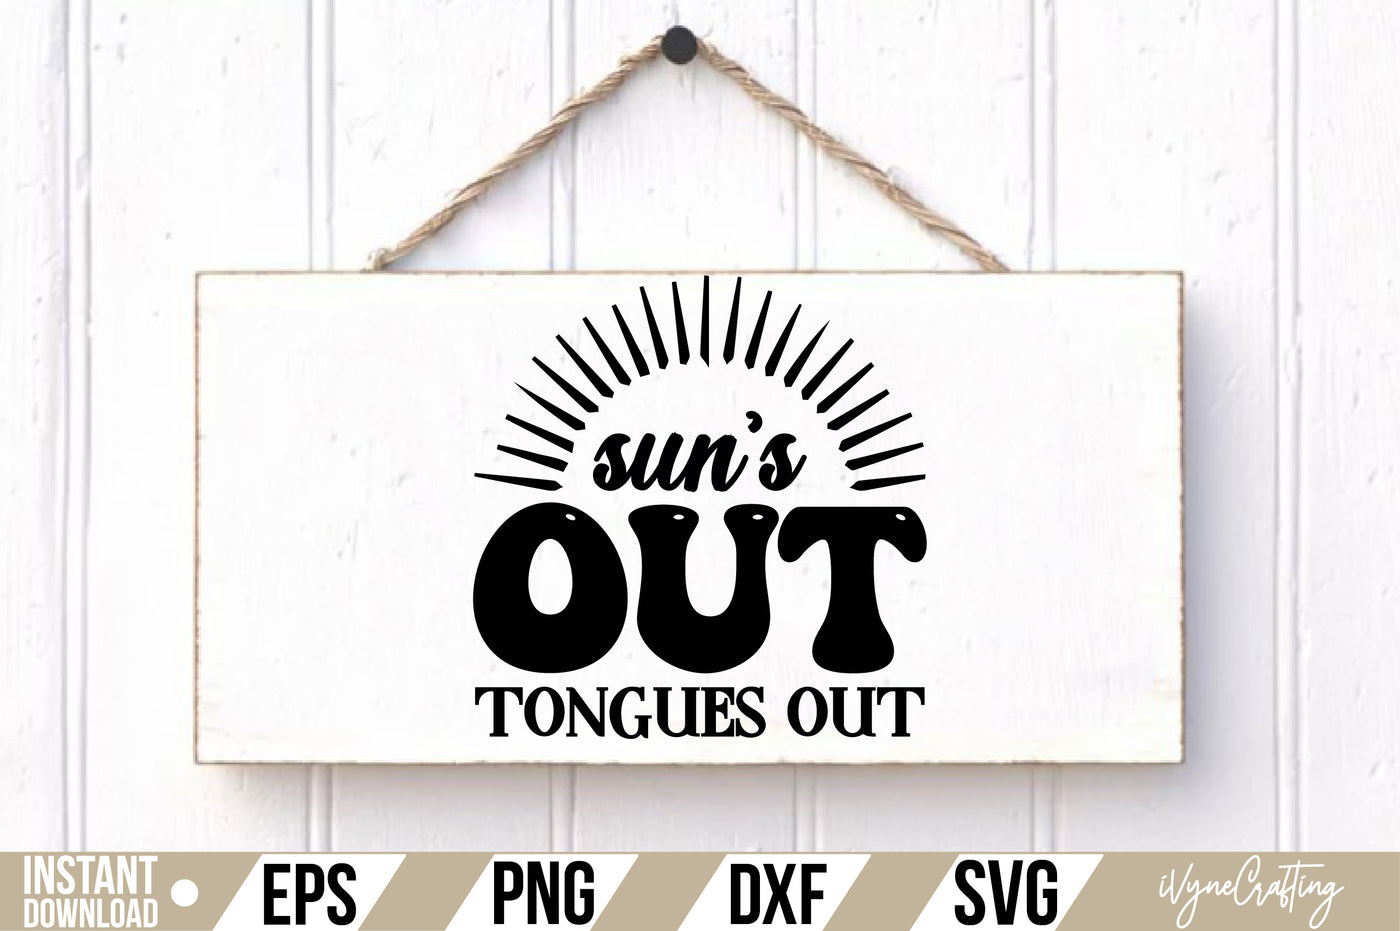 sun's out tongues out SVG Cut File